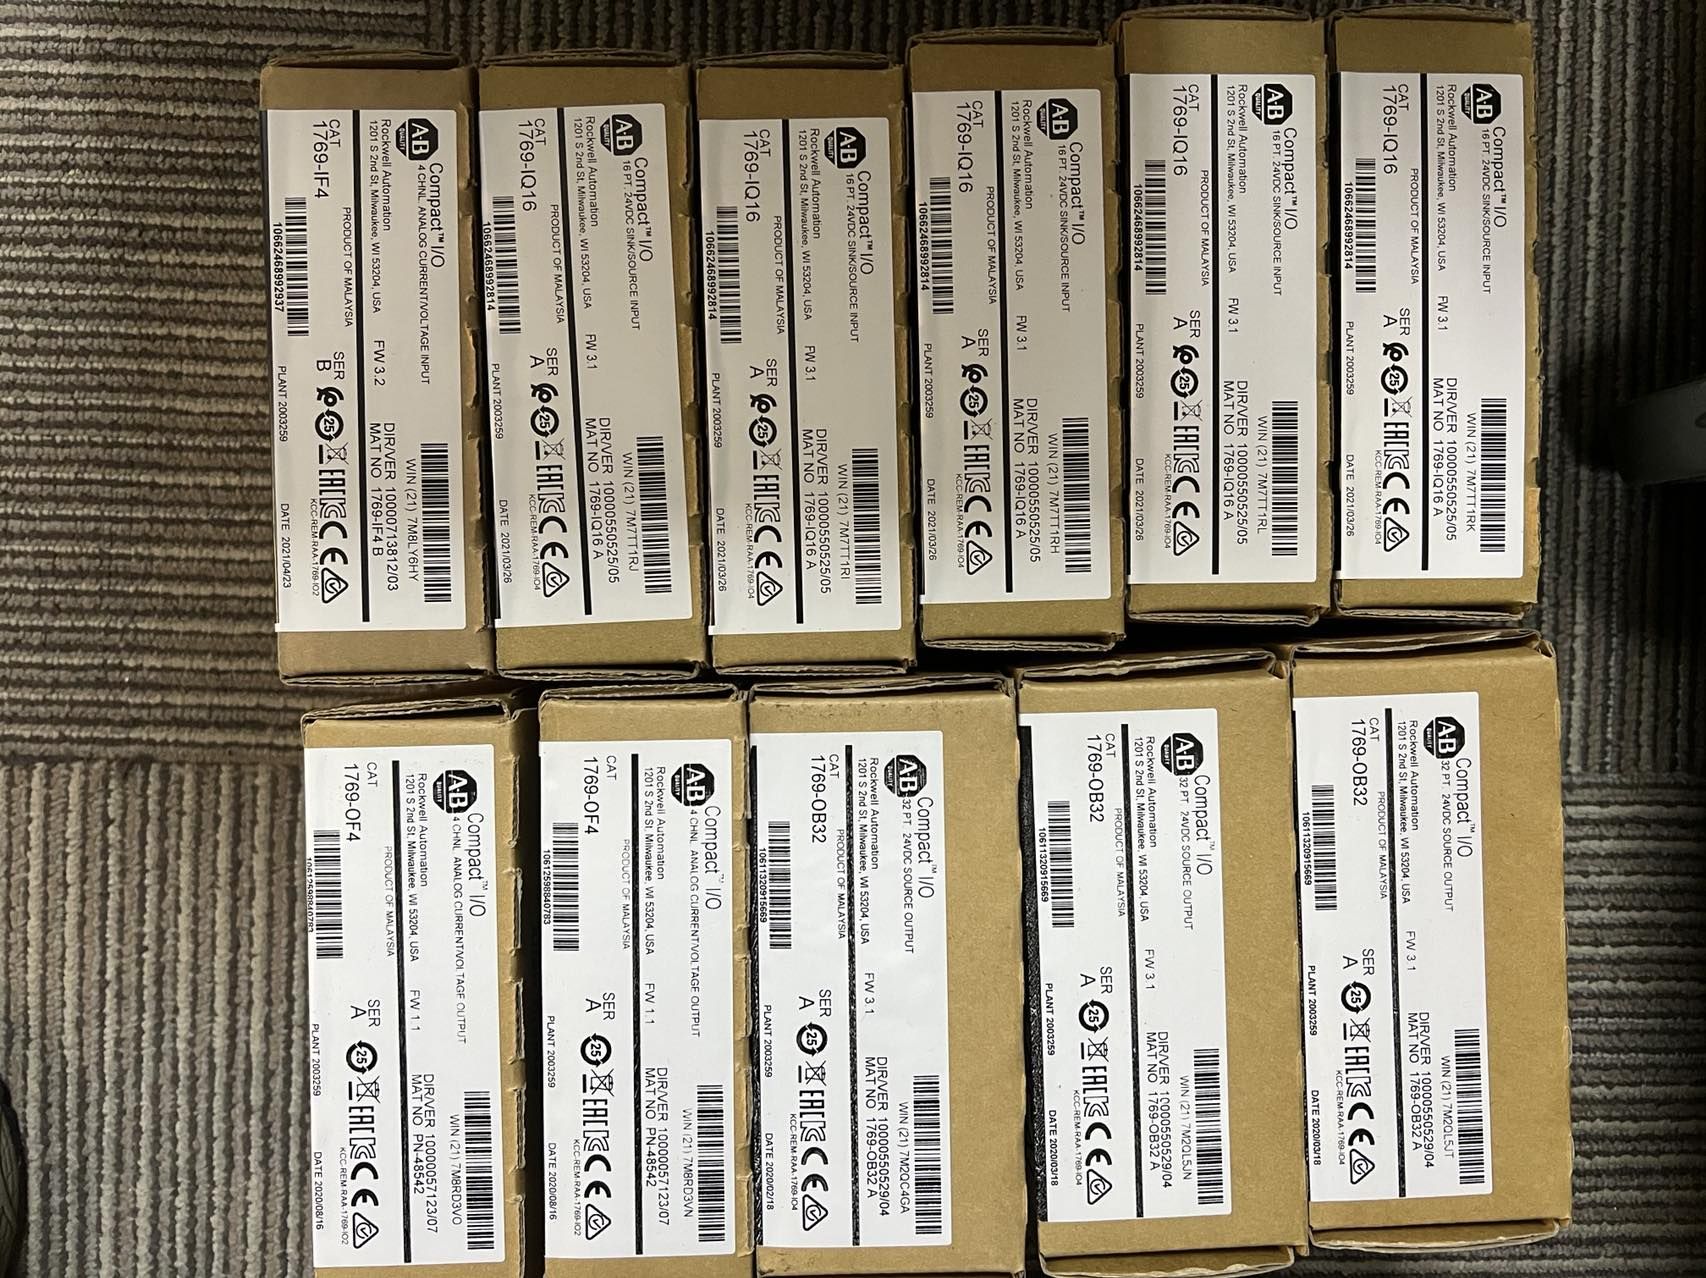 Good price for brand new Allen Bradley 1756-A4 4 Slot ControlLogix Chassis.